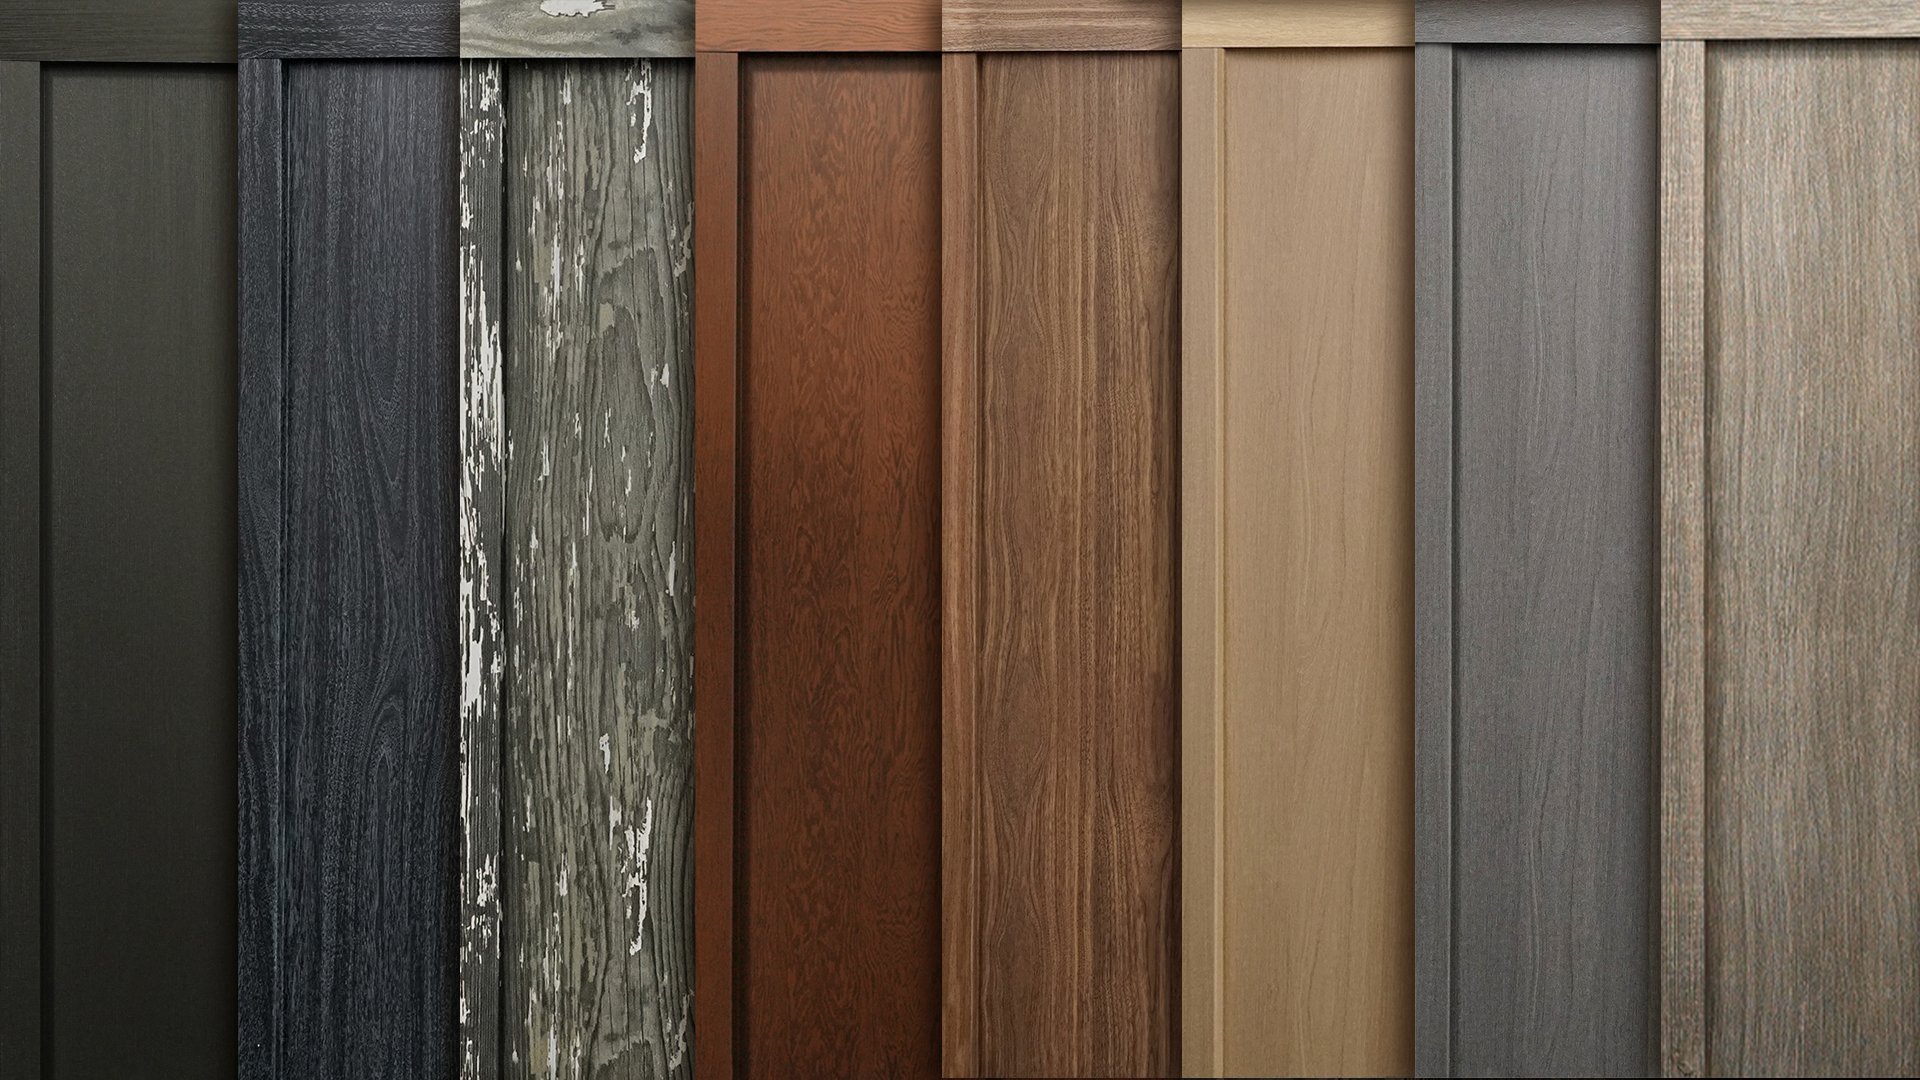 Metal Siding That Looks Like Wood: Colors, Advantages, And Cost